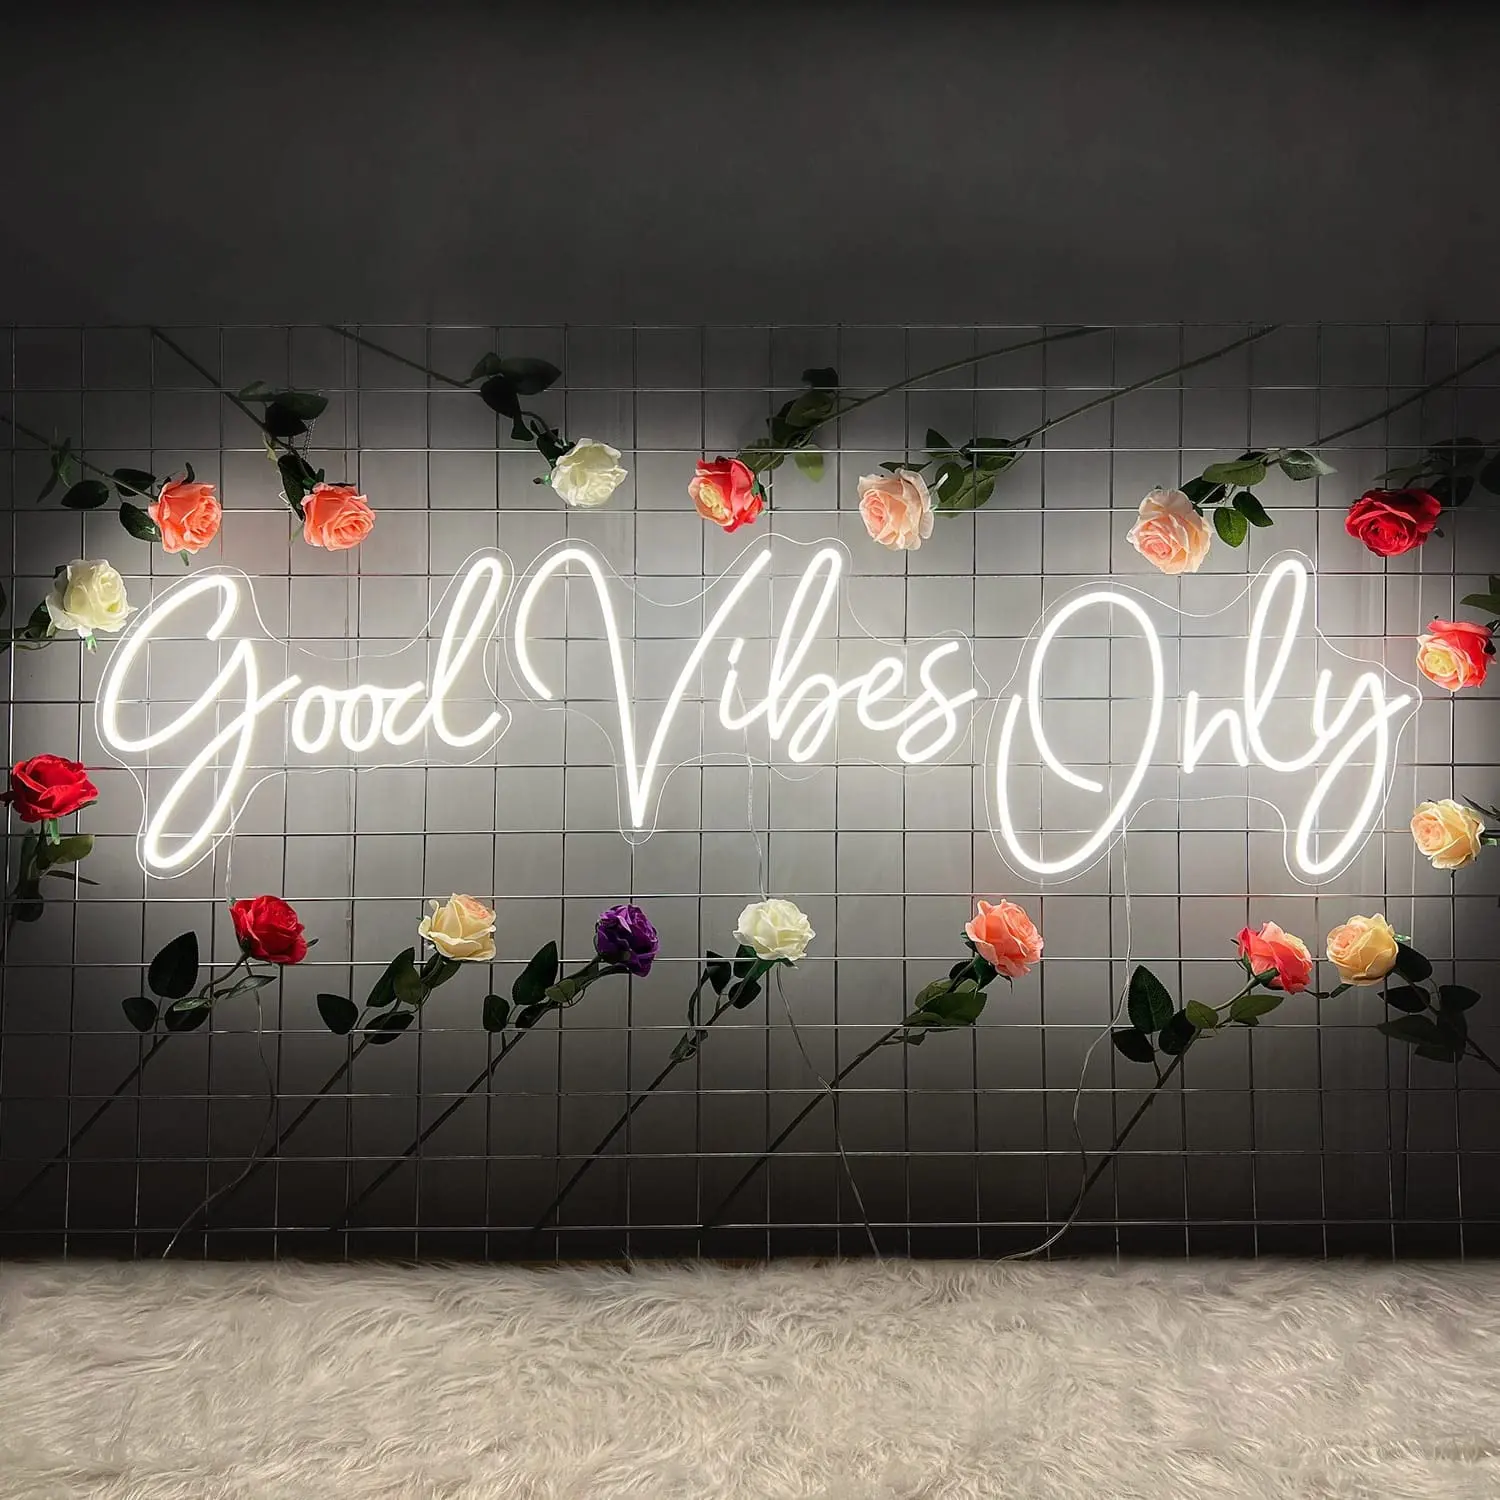 Good Vibes Only LED Signs For Wall Decor Neon Light For Birthday Party For Women Girls Bedroom